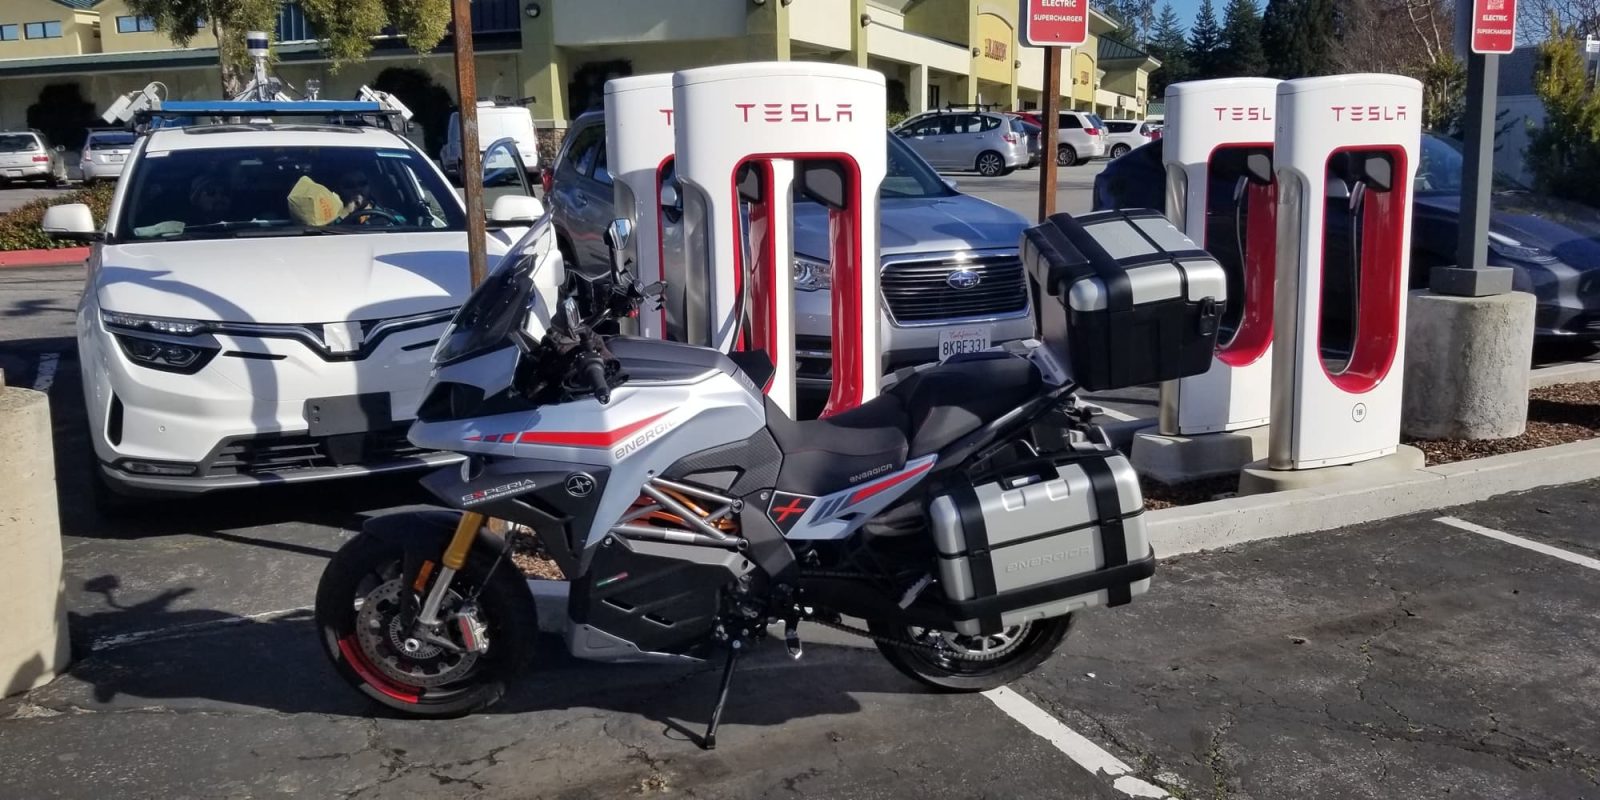 Long range electric motorcycles are now charging up at Tesla Superchargers